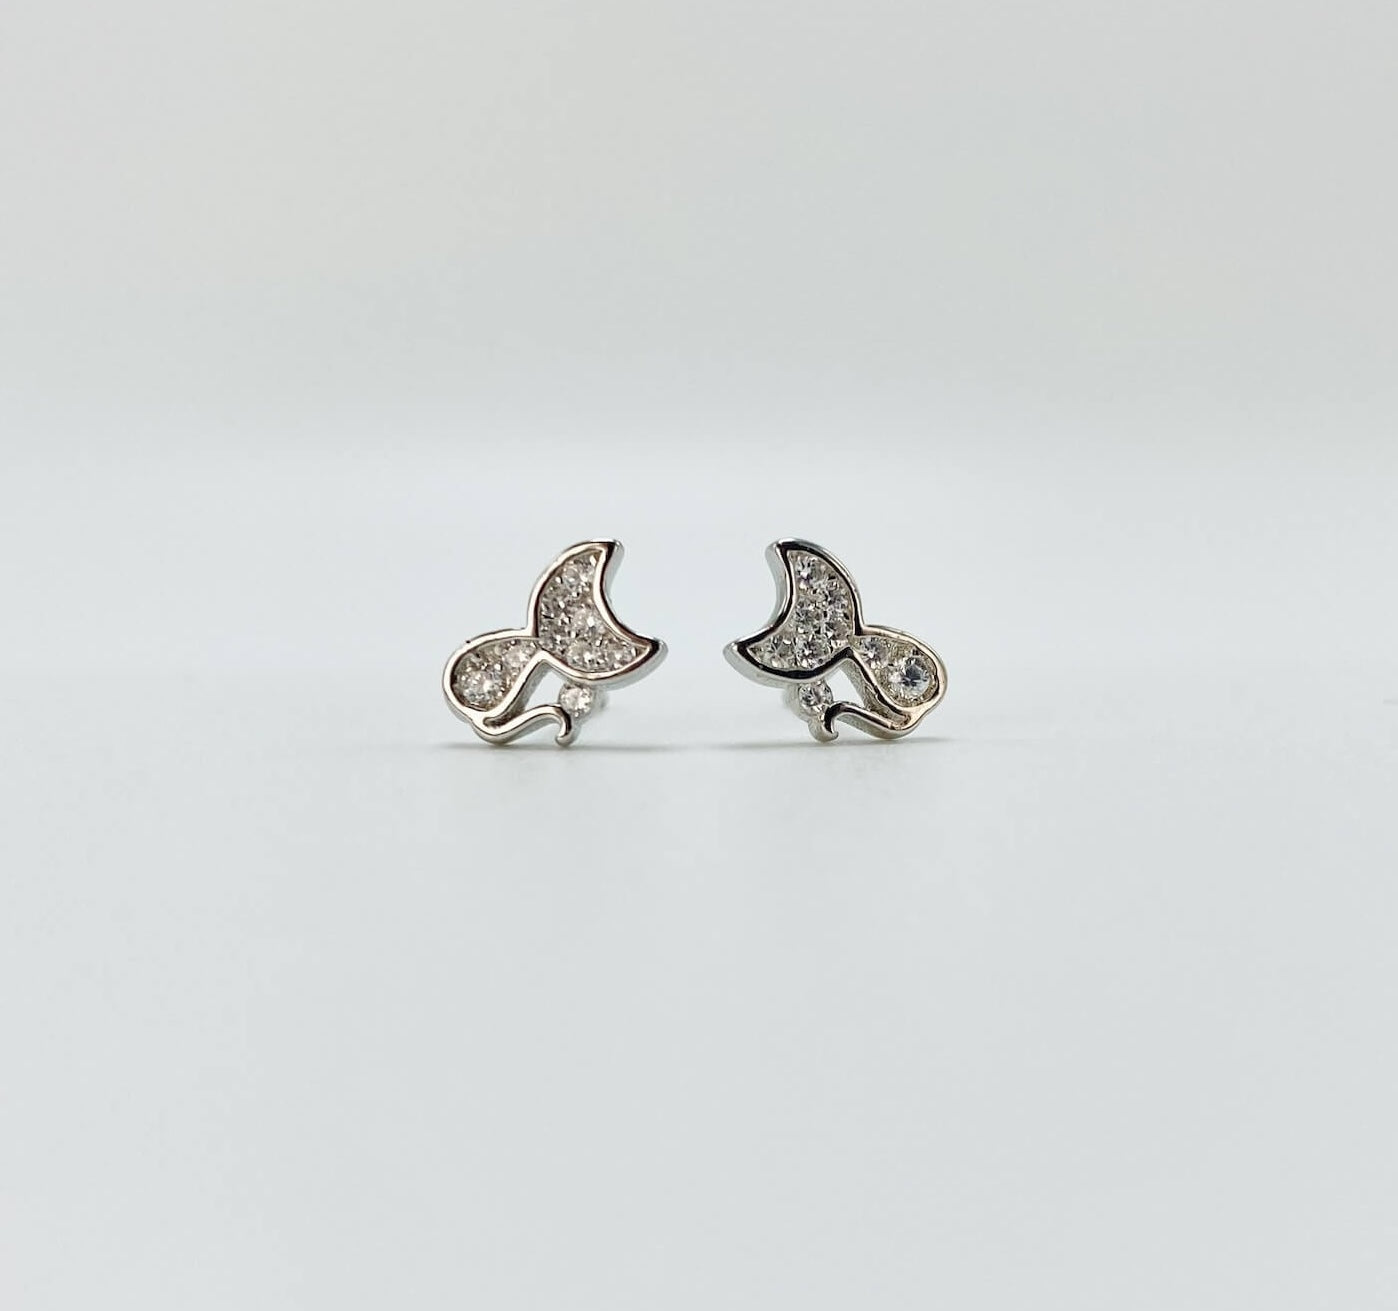 Sterling silver cat earring studs with moon shaped heads and cubic zirconia gemstones. Very small.